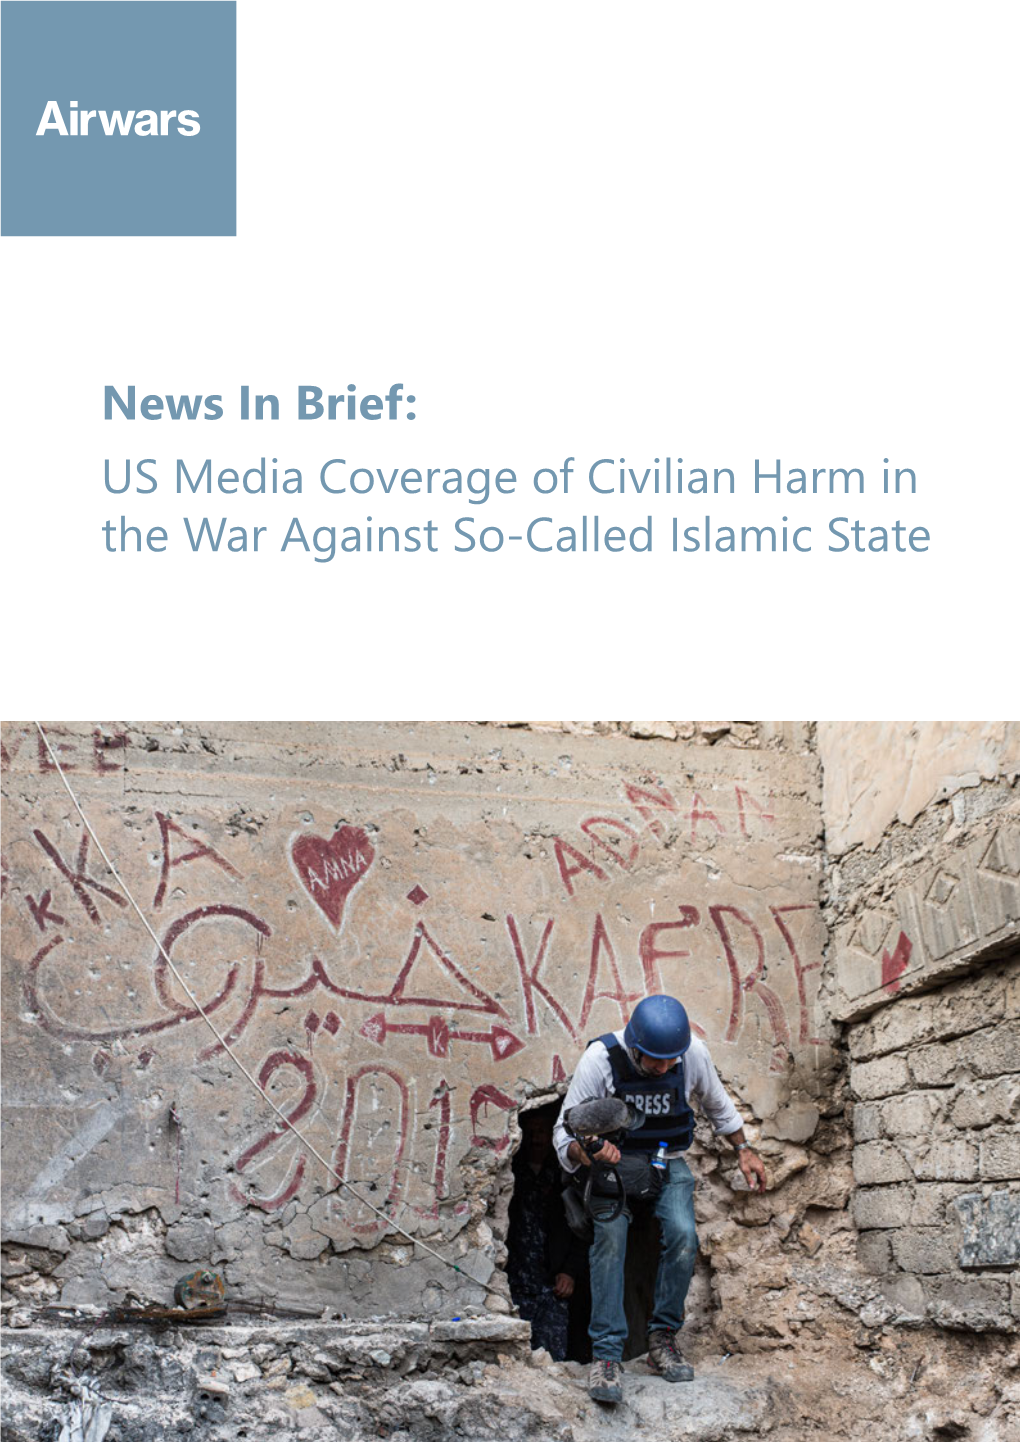 News in Brief: US Media Coverage of Civilian Harm in the War Against ISIS